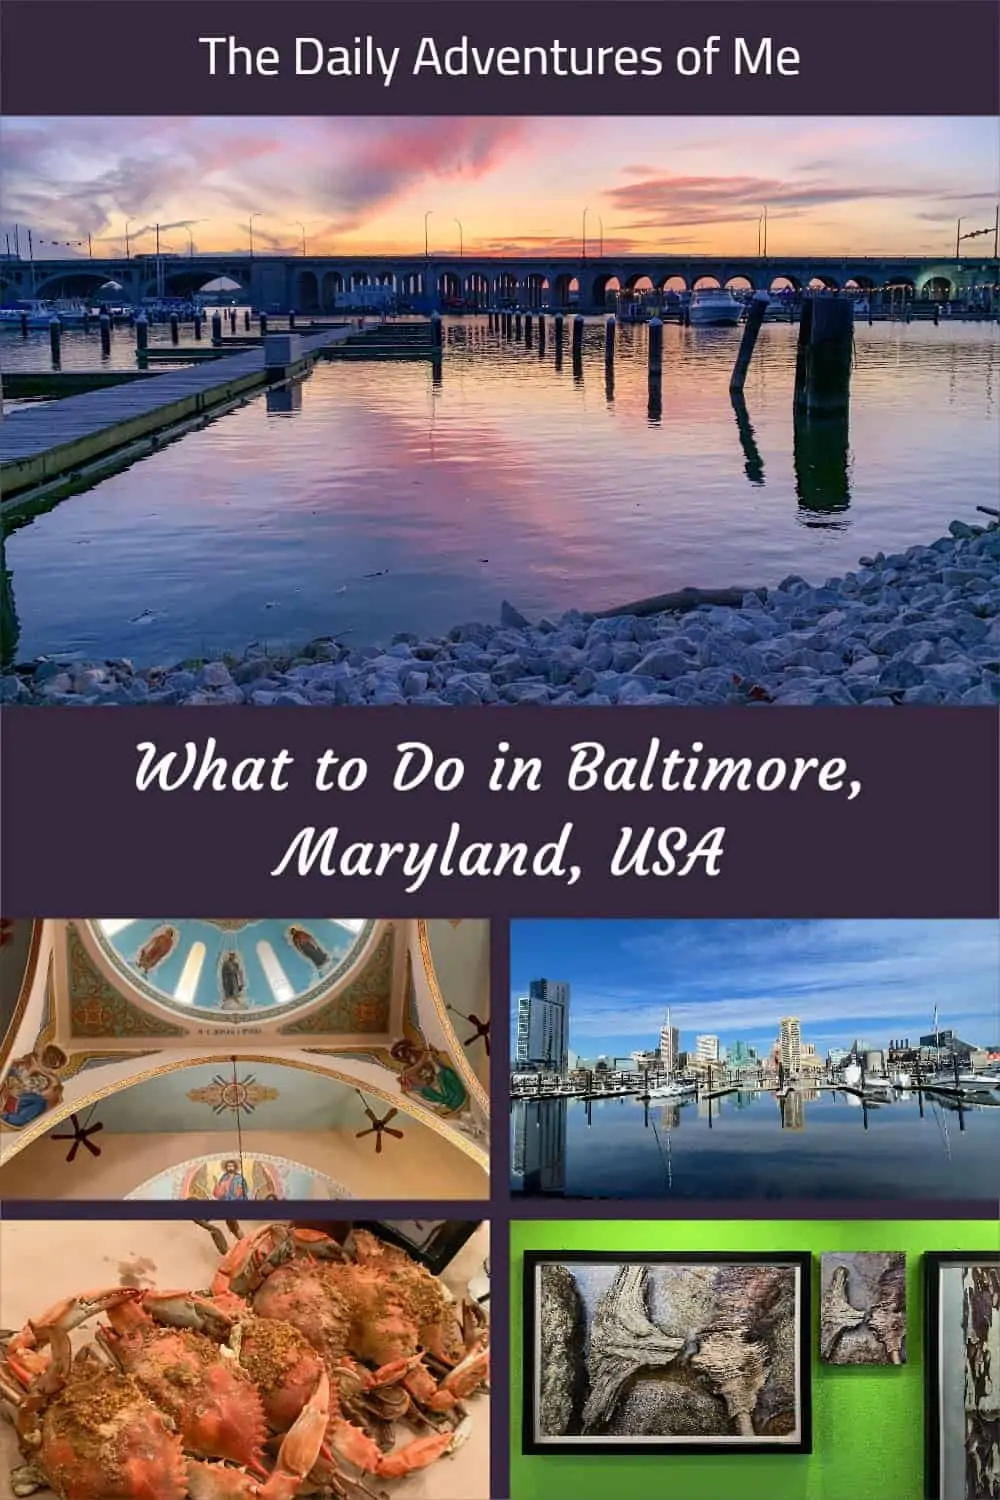 Read on for things to do during a weekend getaway in Baltimore, Maryland. There are so many things to choose from! @VisitMaryland #whattodoinMaryland